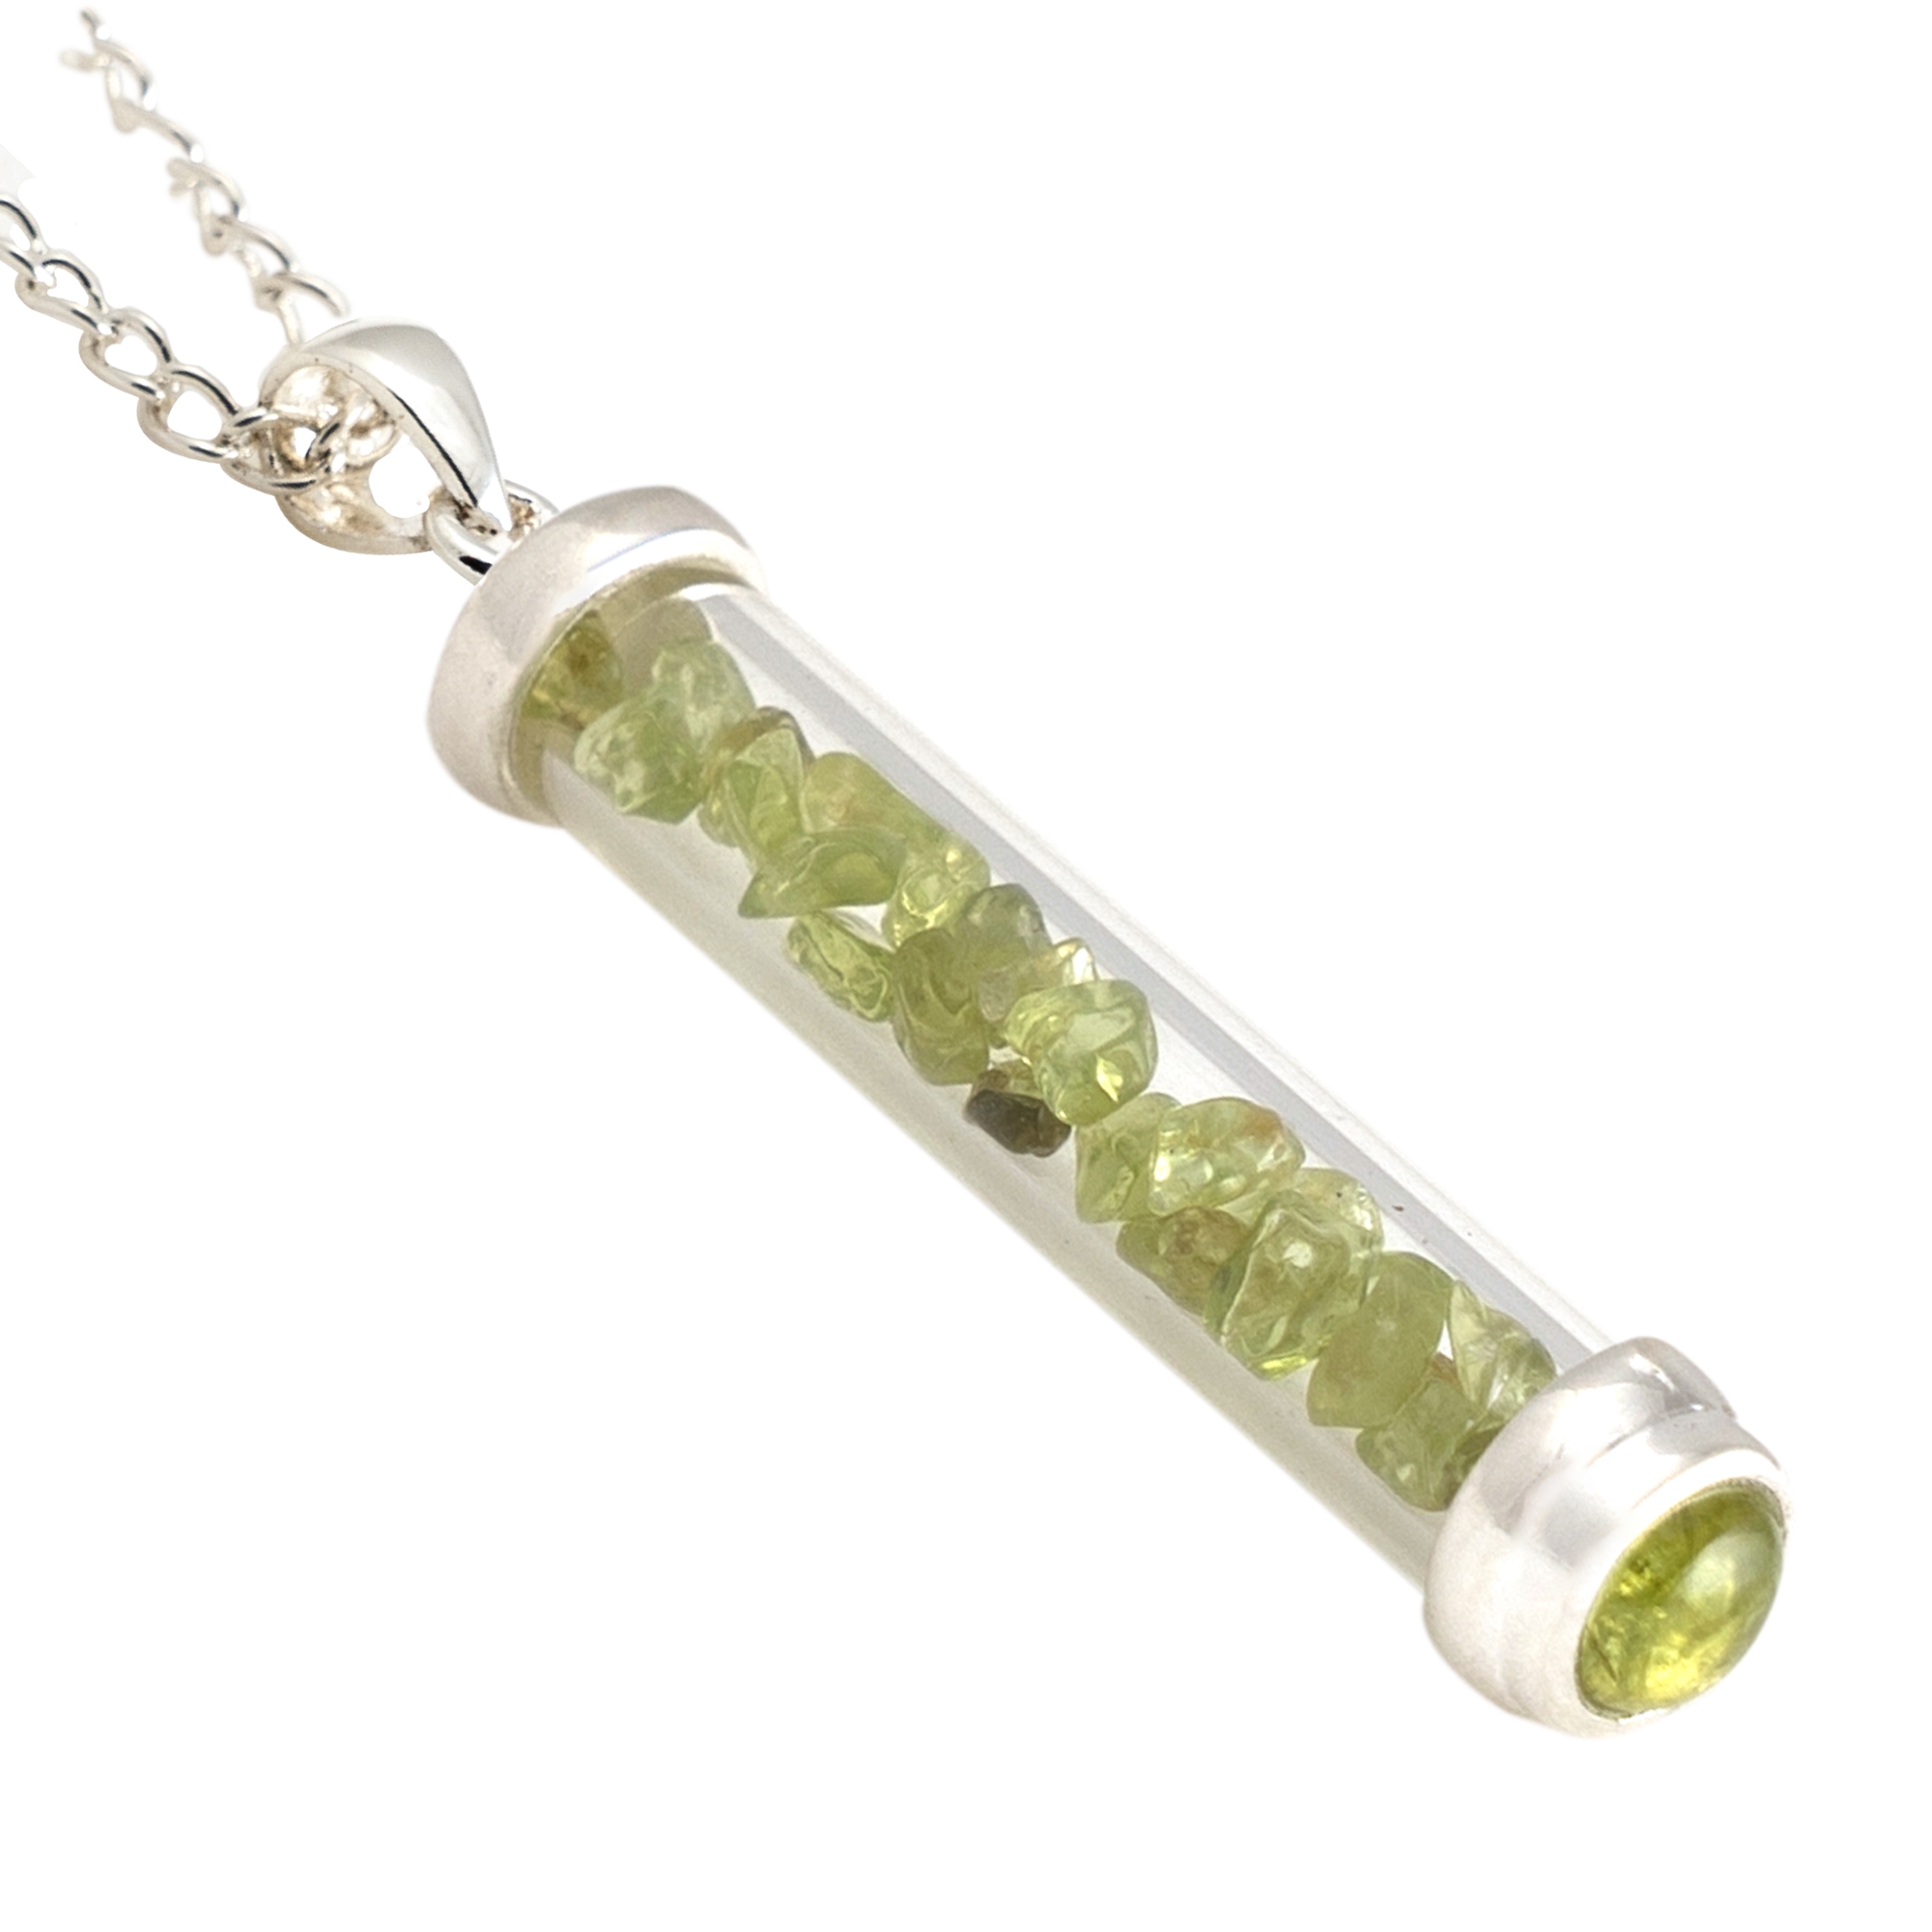 PERIDOT GEM POWER VIAL PENDANT FOR TRANSFORMATION - Click Image to Close